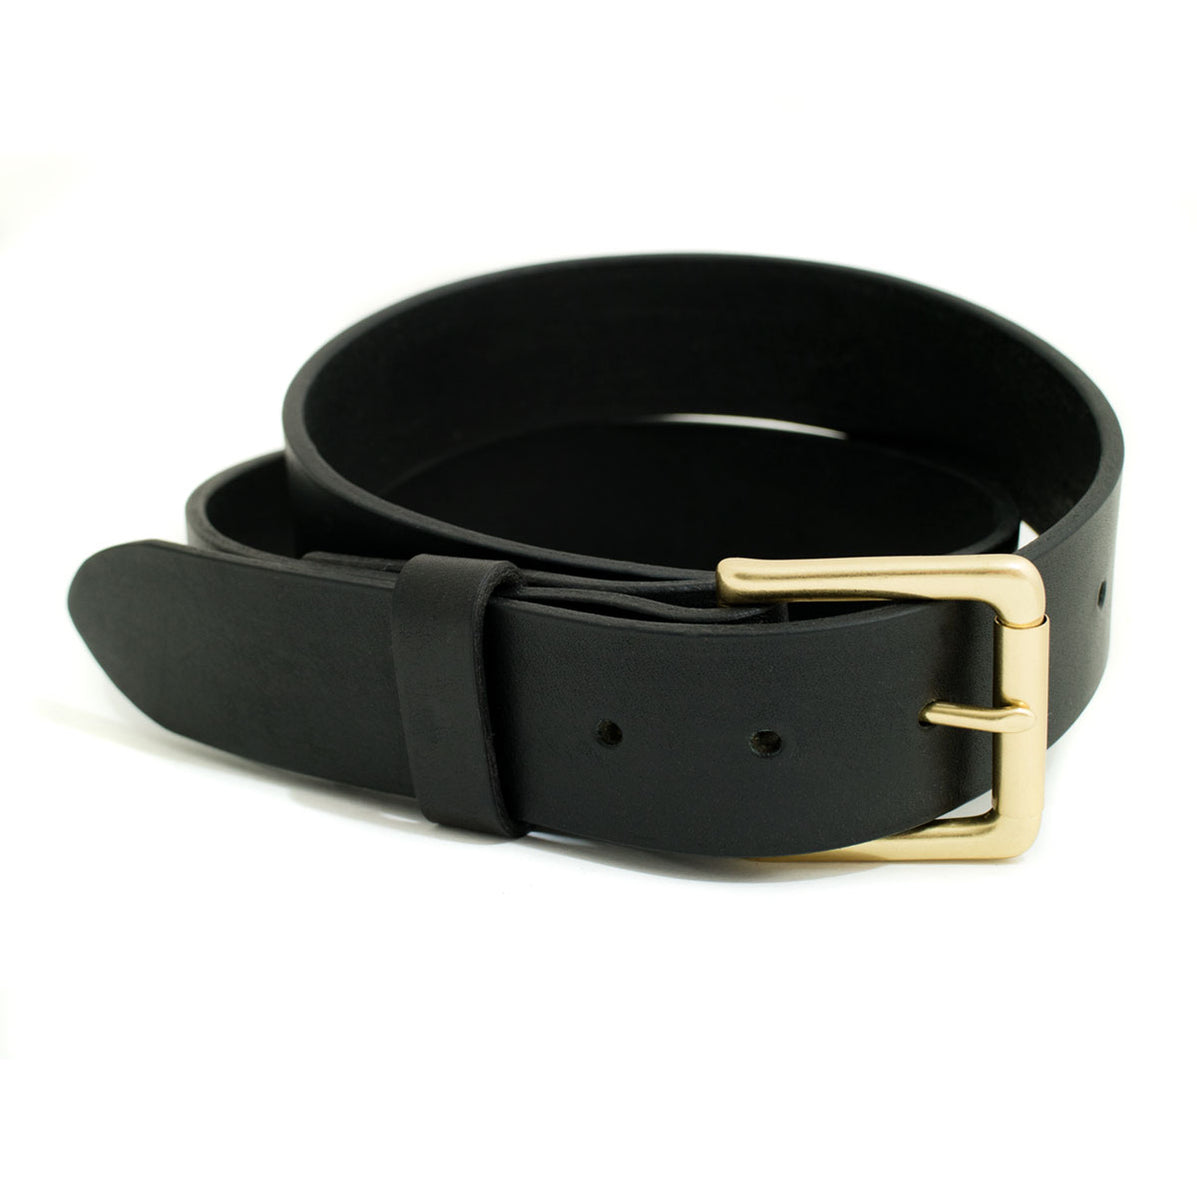 Men's Classic Leather Belt :: Handmade in the USA by Make Smith Leather ...